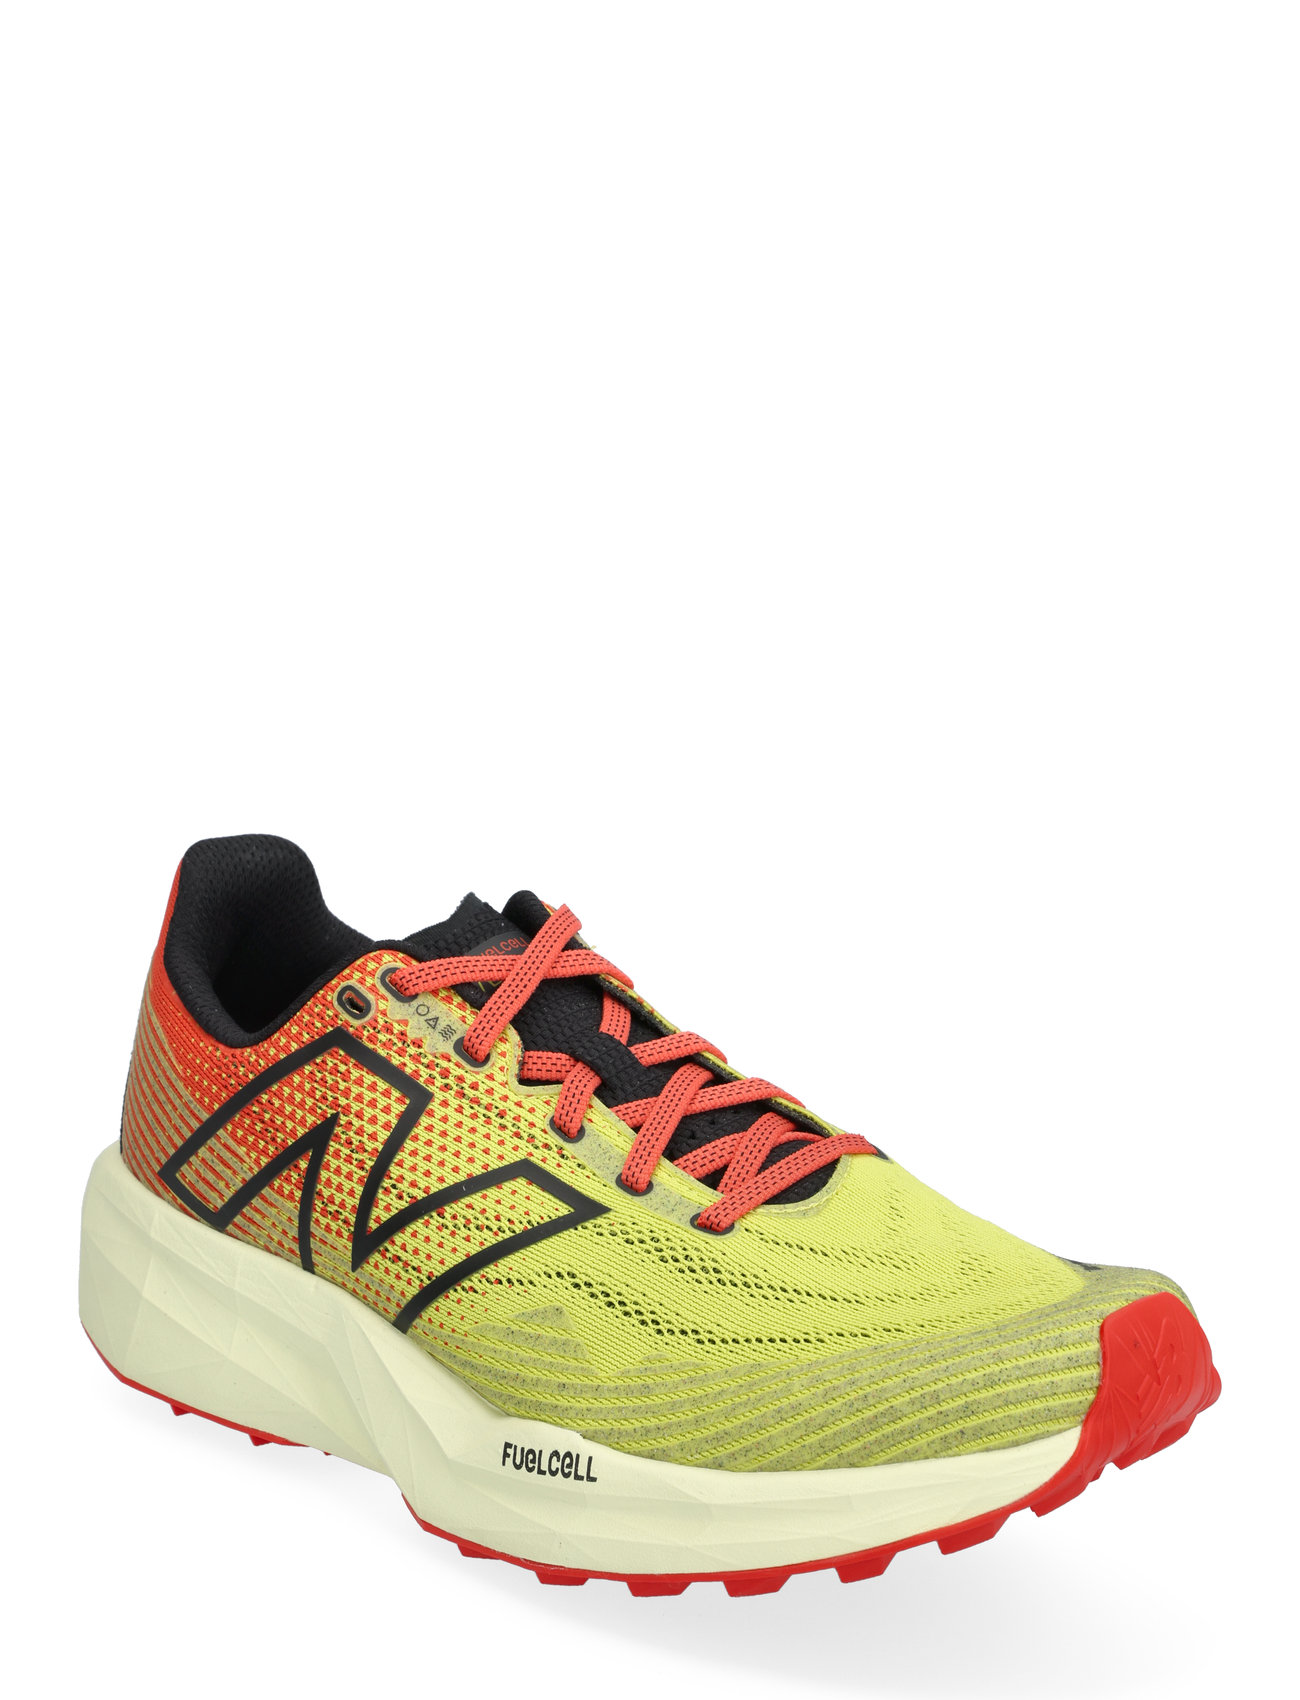 New Balance Fuelcell Summit Unknown V5 Sport Sport Shoes Running Shoes Multi/patterned New Balance